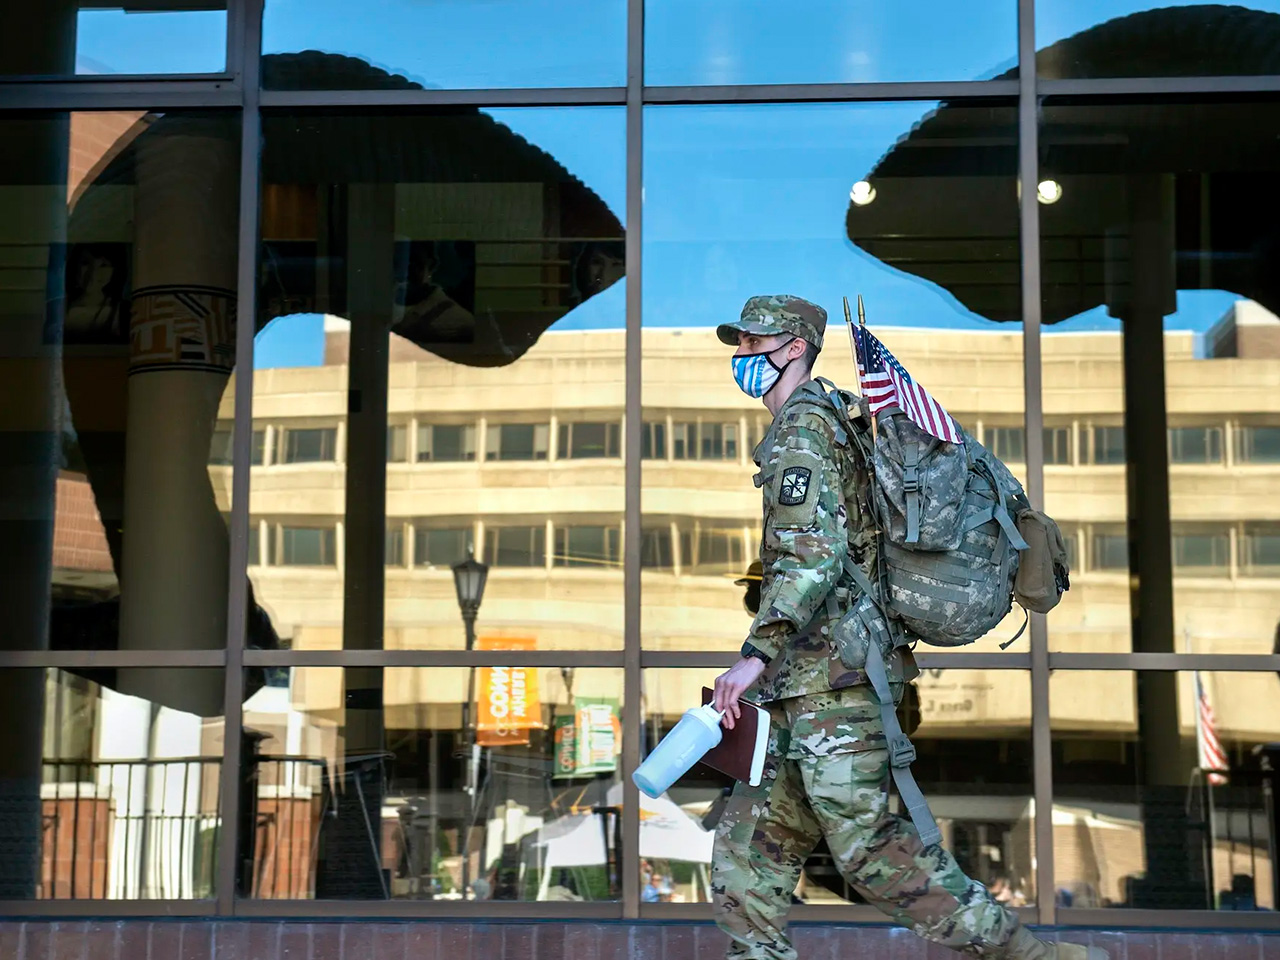 A student in military clothing walks through the Commons